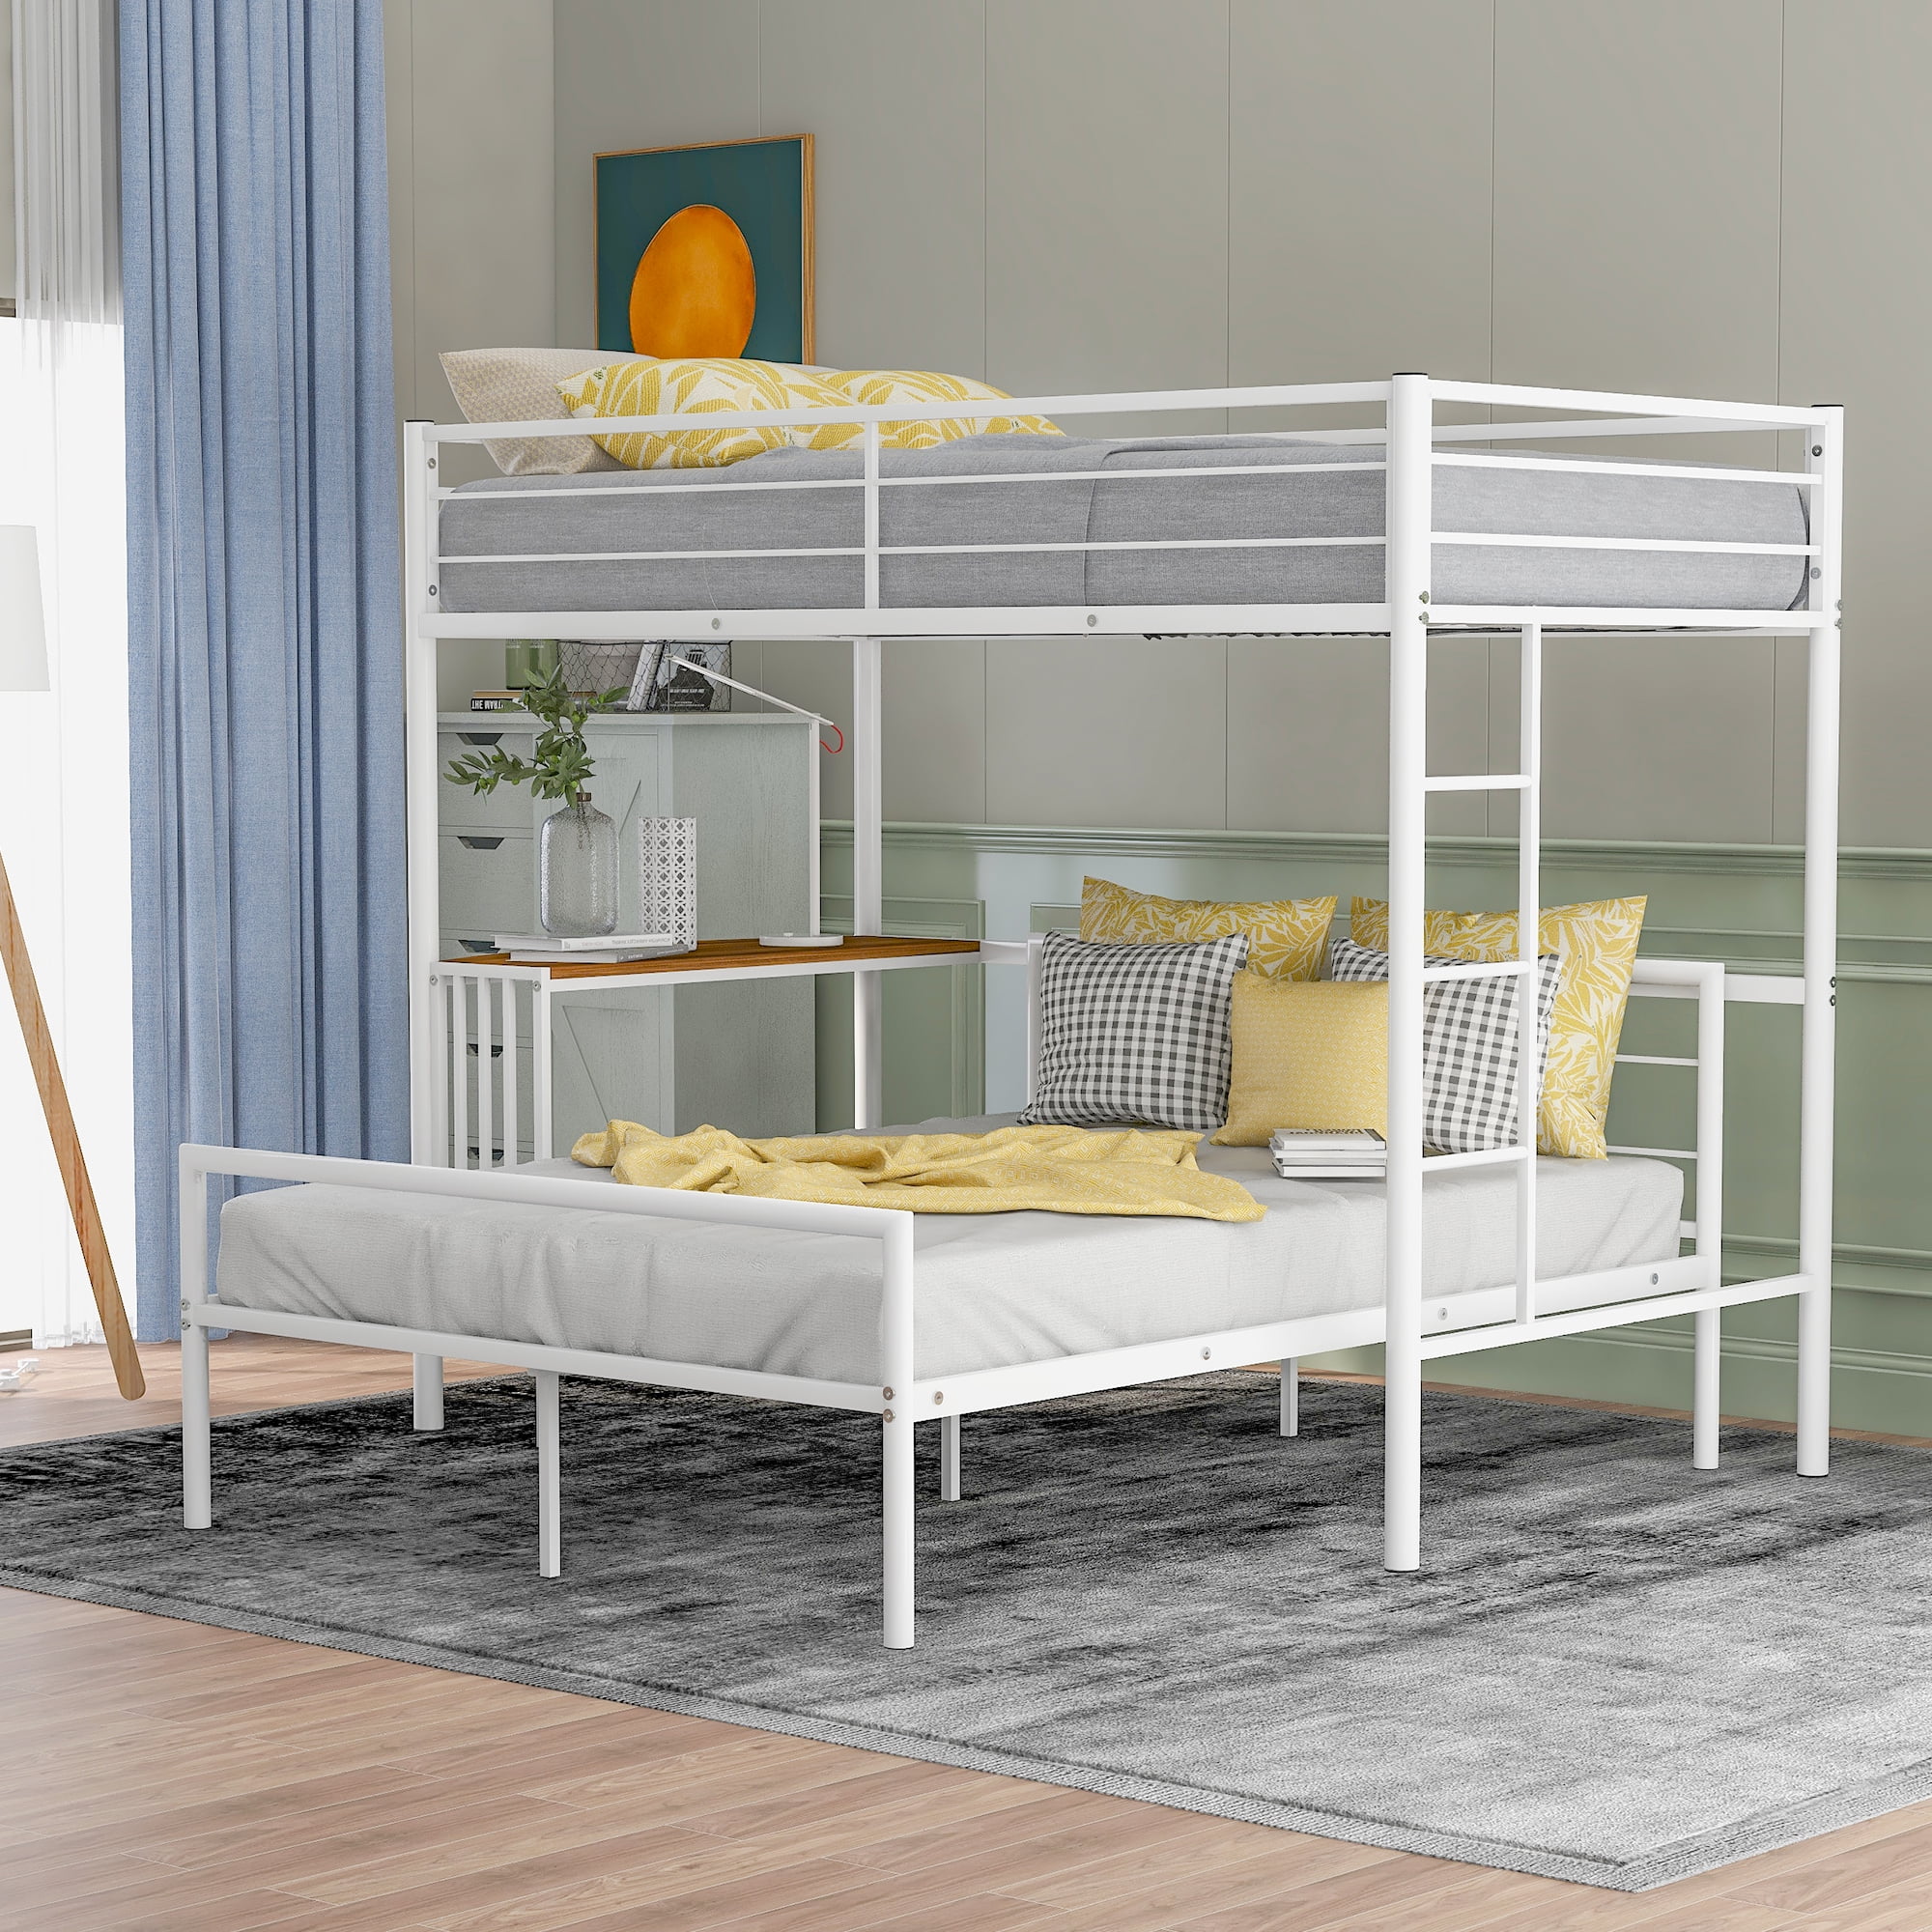 Full Bunk Bed Sy Metal, Twin Over Full Bunk Bed That Can Be Separated